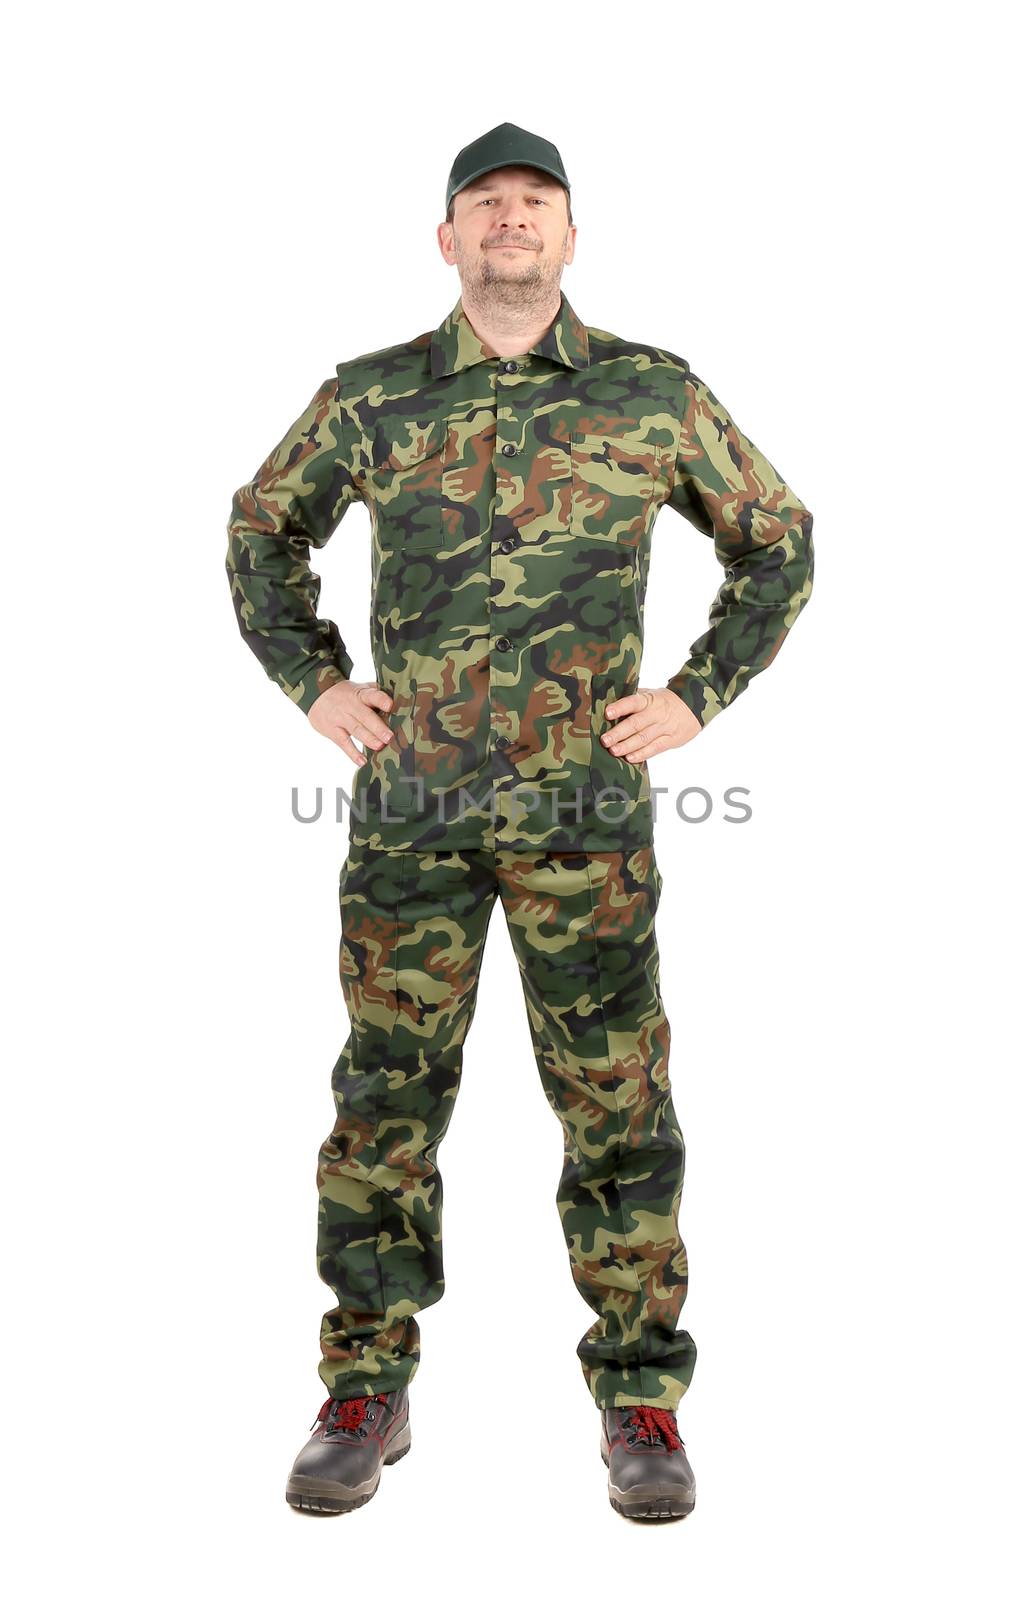 Proud man in military suit. Isolated on a white background.